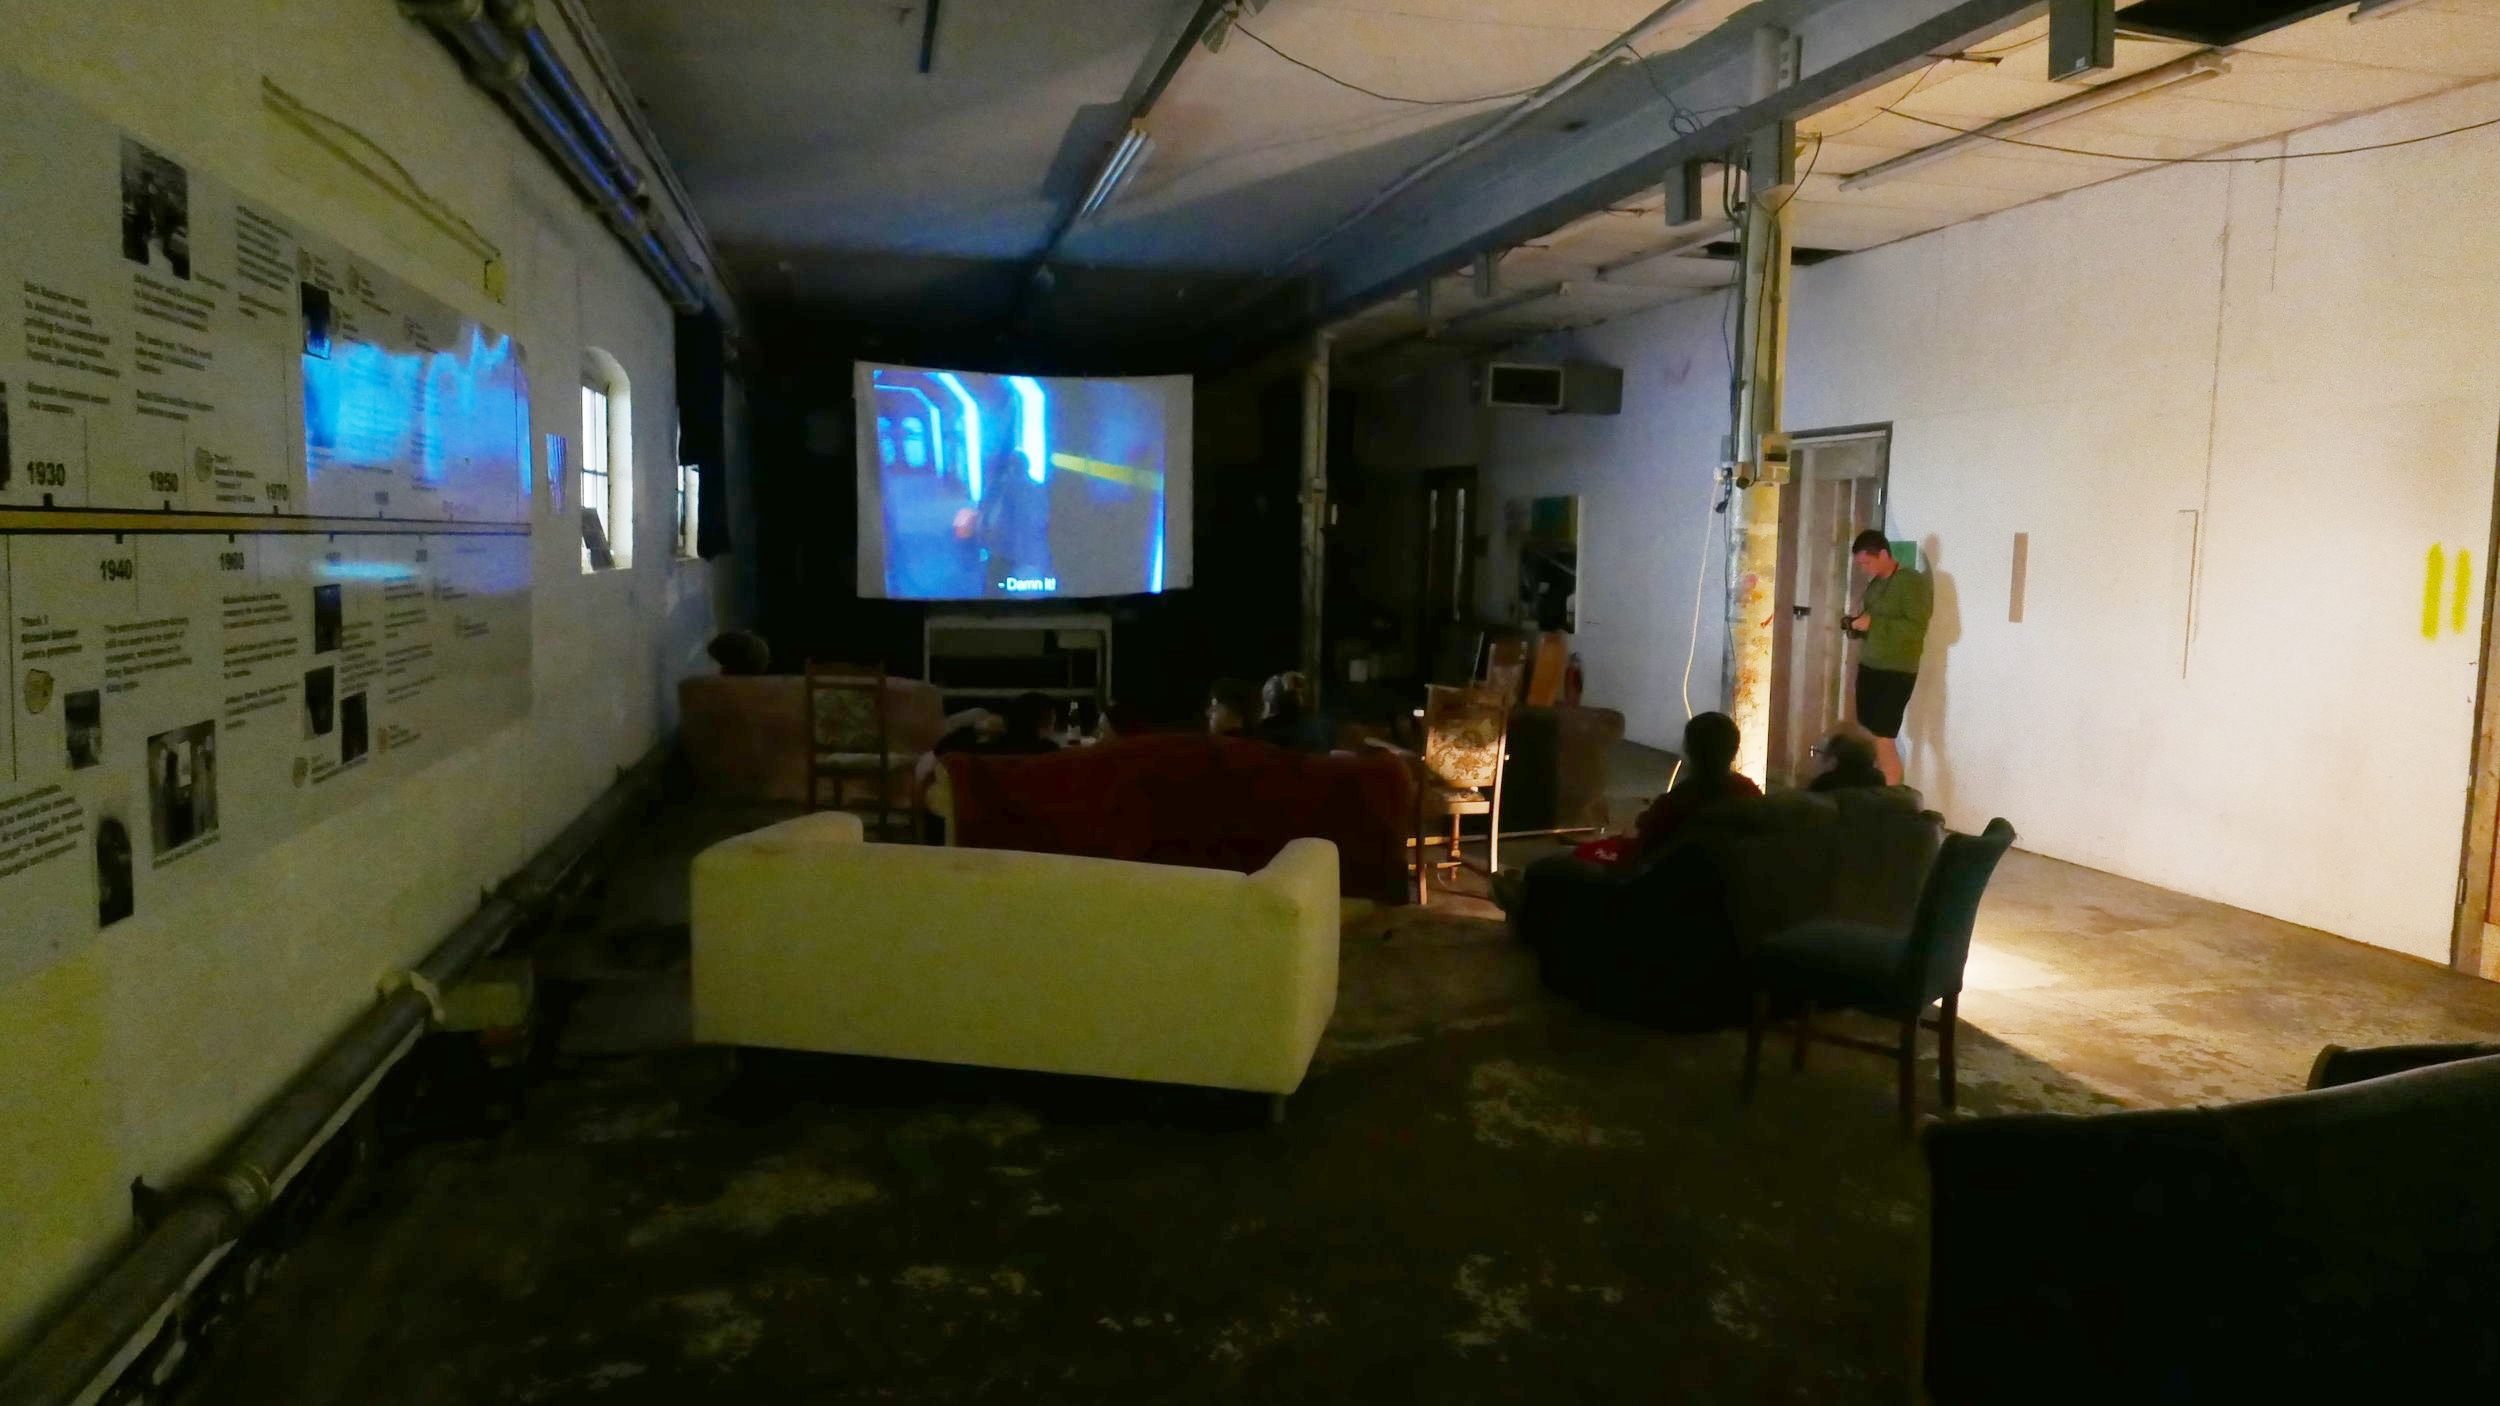 Films being shown in the Lower Gallery